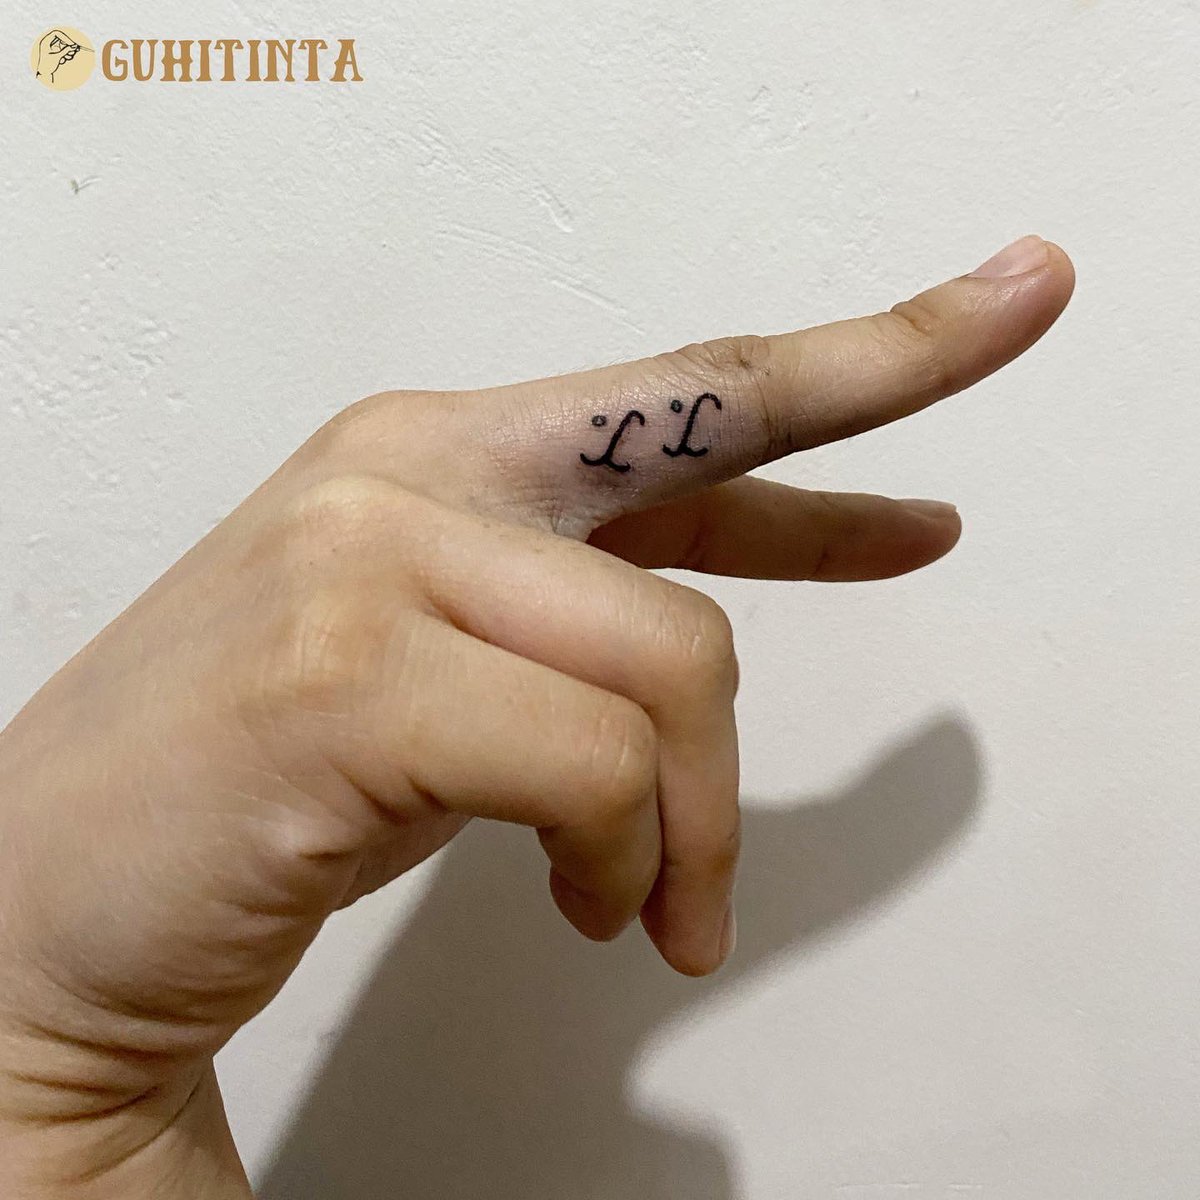 SIGN LANGUAGE TATTOO COLLECTION